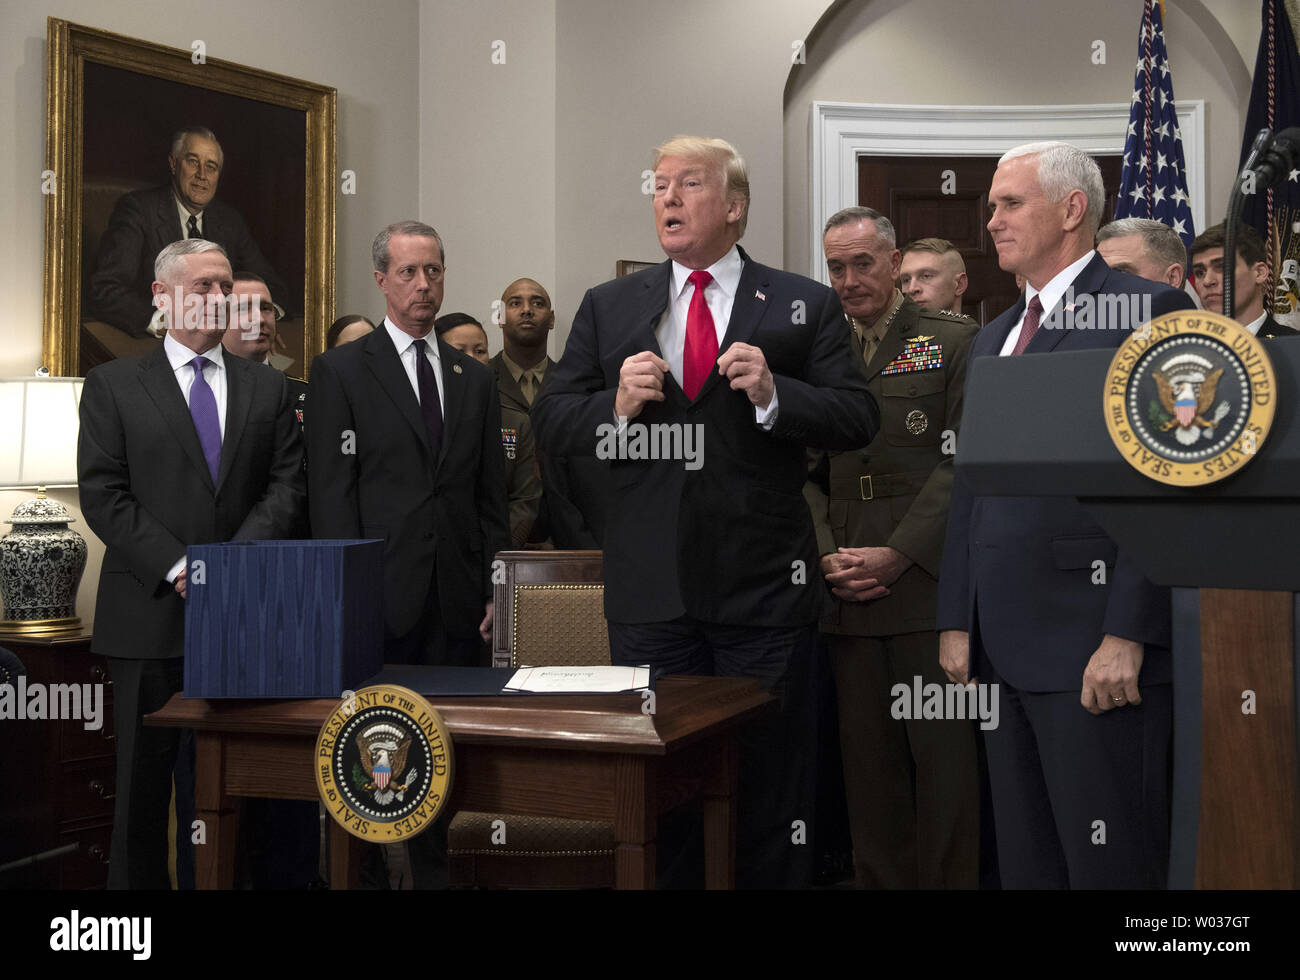 President Donald Trump adjusts his jacket after signing H.R. 2810, the National Defense Authorization Act for Fiscal Year 2018, during a signing ceremony in the Roosevelt Room on December 12, 2017, in Washington, D.C. Trump was joined by, from left to right, Defense Secretary Jim Mattis, Chairman of the House Armed Services Committee Mac Thornberry, R-TX, Chairman of the Joint Chiefs of Staff Joseph F. Dunford, Vice President Mike Pence and members of the military. Photo by Kevin Dietsch/UPI Stock Photo